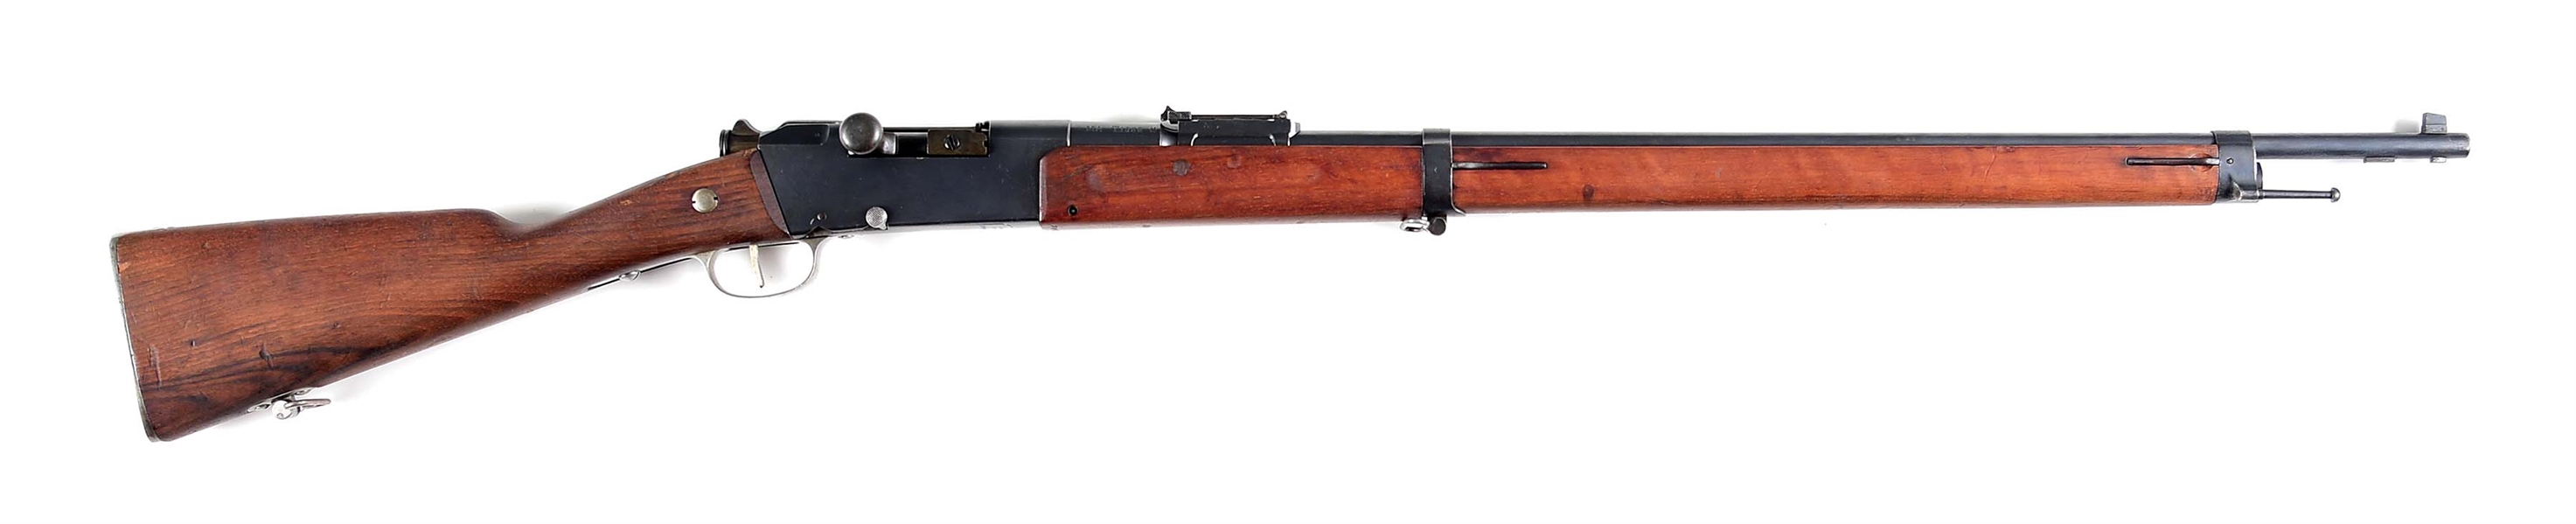 (C) FRENCH MANUFACTURE DARMES TULLE LEBEL MODEL 1886 M93 BOLT ACTION RIFLE.